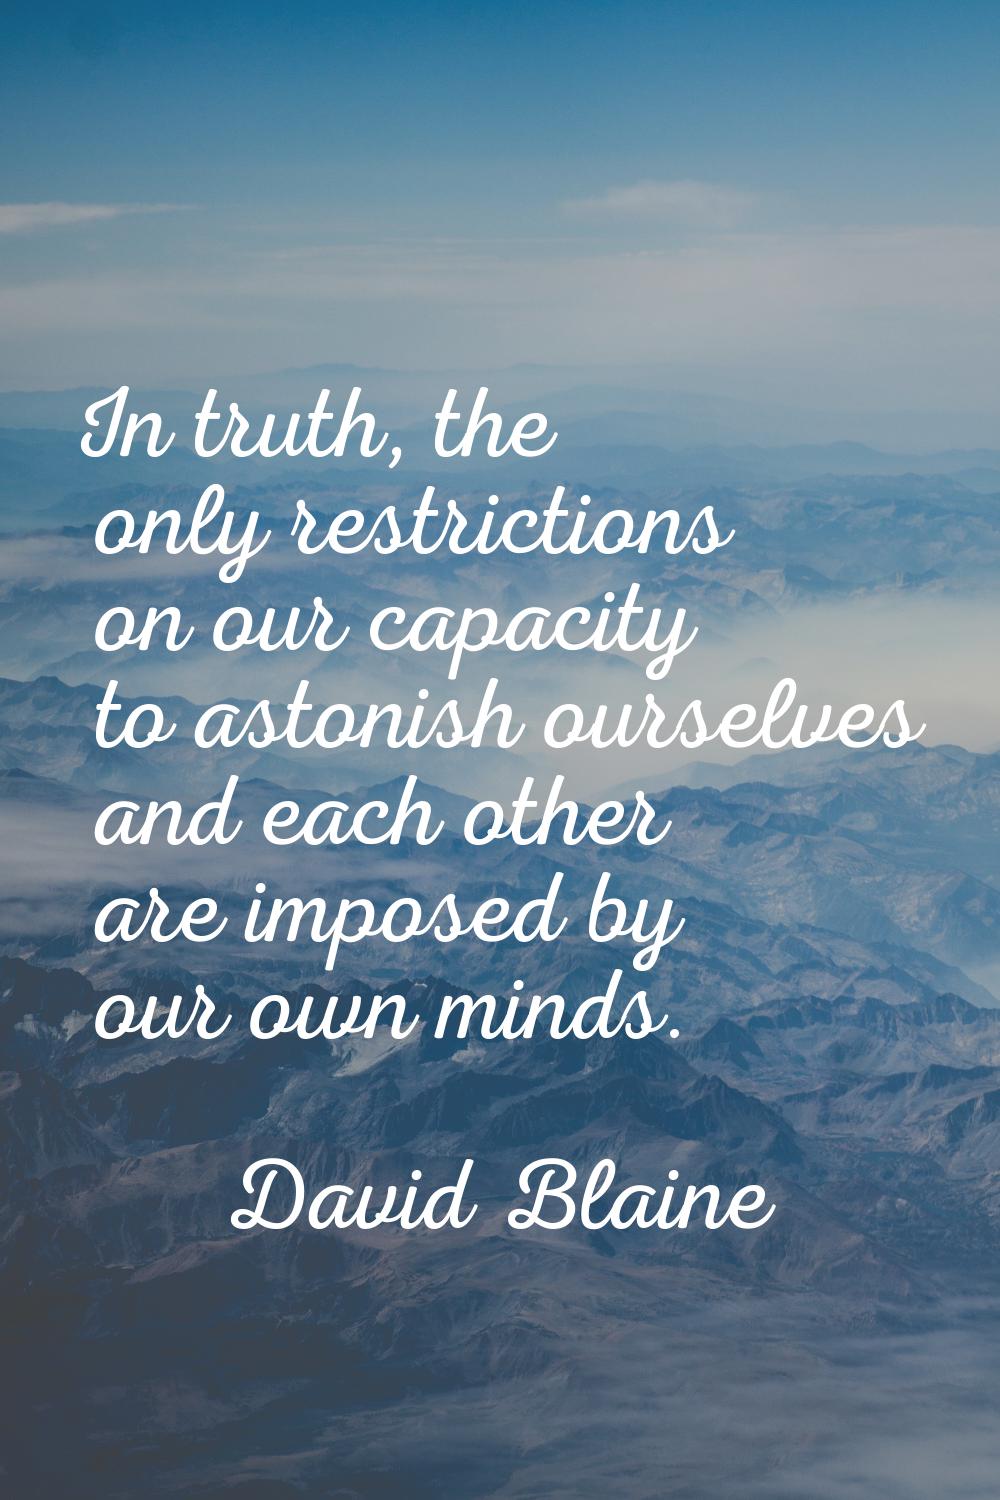 In truth, the only restrictions on our capacity to astonish ourselves and each other are imposed by